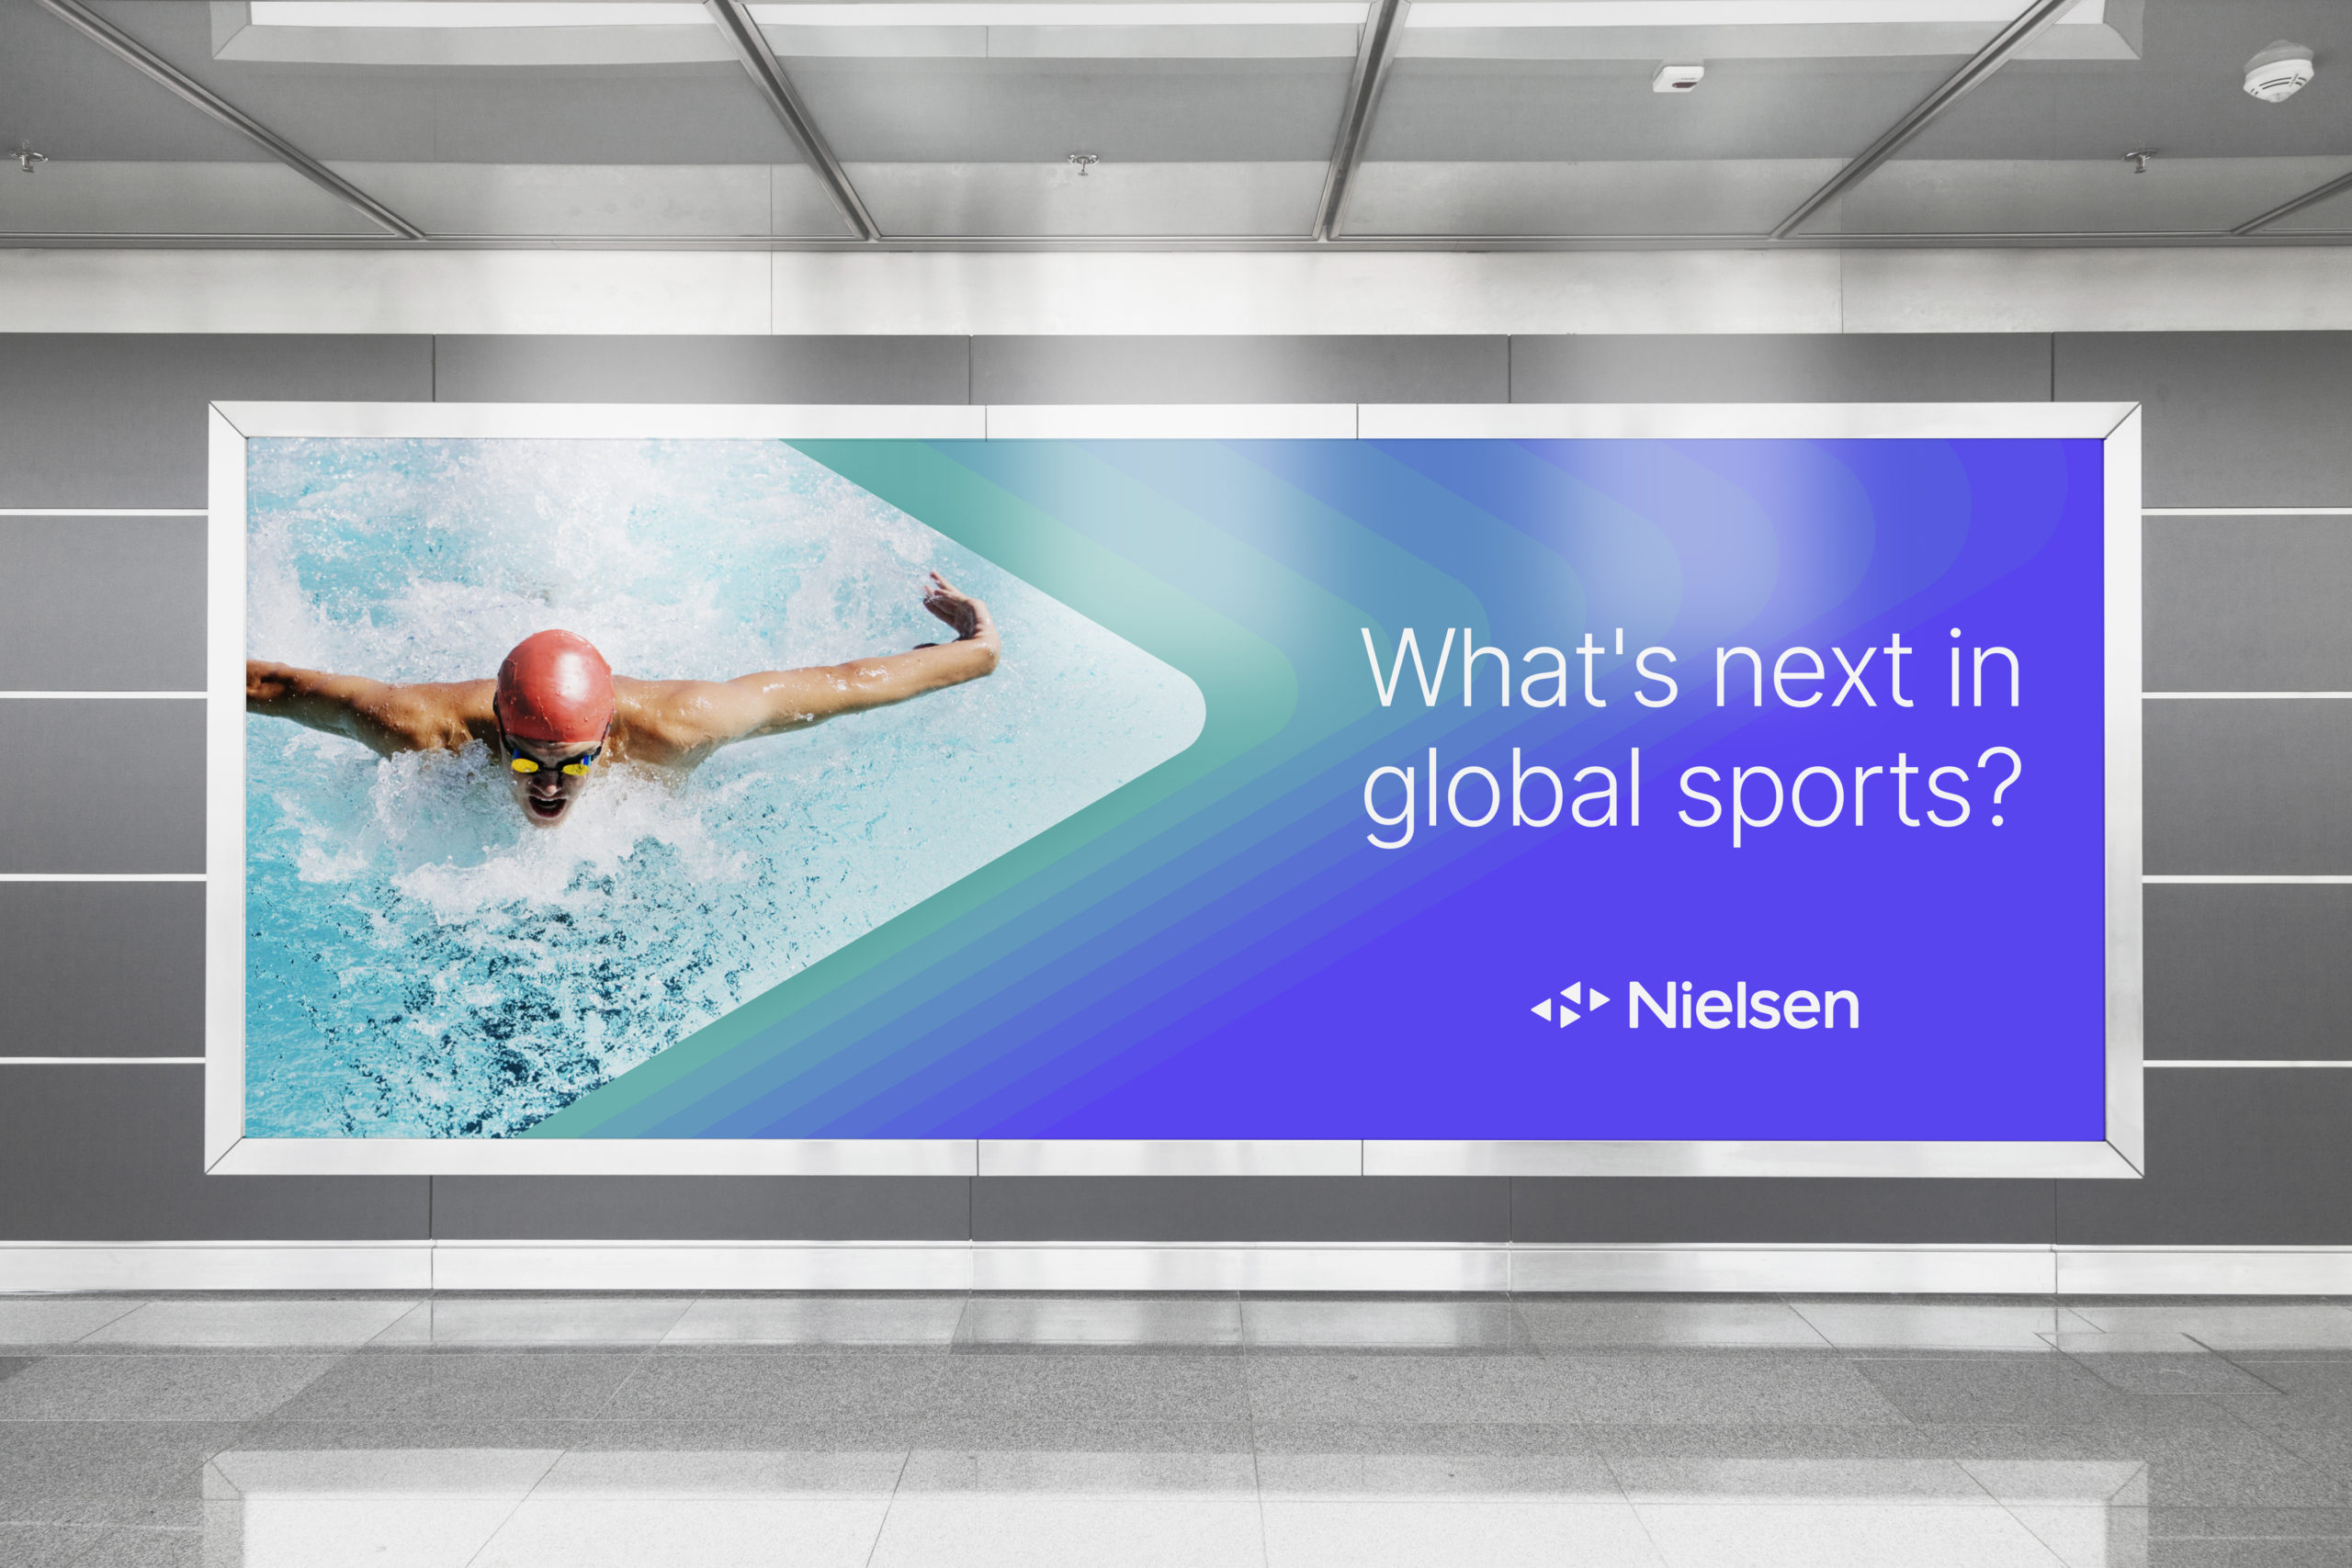 Blue Nielsen Poster with a professional swimmer next to text that says “what’s next in global sports?”